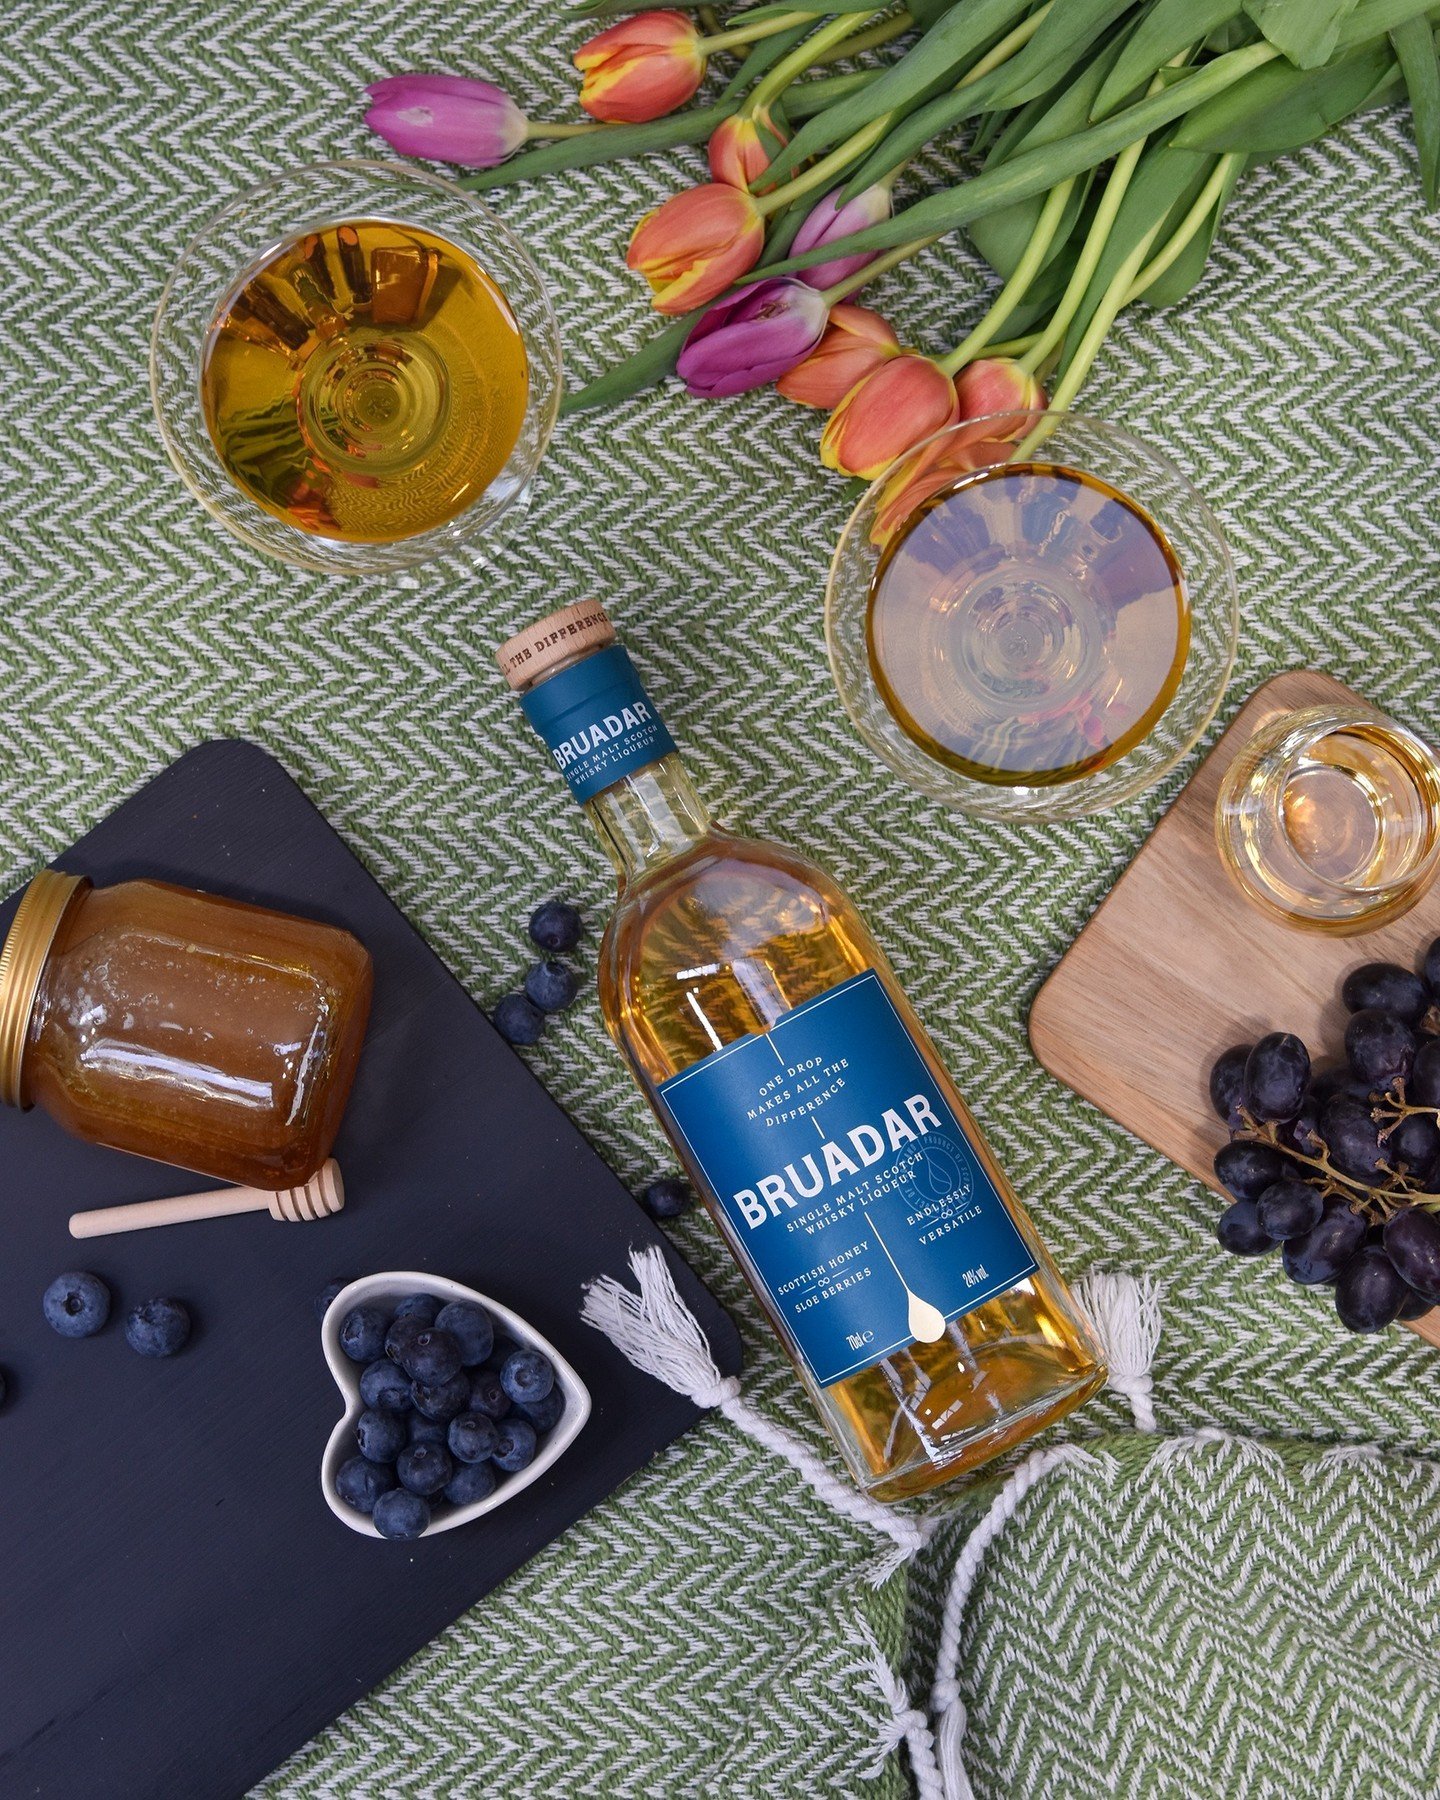 Picnic essentials with Bruadar✨️⁠
Take a look below for some ultimate Bruadar picnicking essentials👇🏼⁠
⁠
💐 Cute glassware - we like a glencairn and martini glass for a cocktail option⁠
💐 Obviously a bottle of Bruadar for a sweet treat at the week